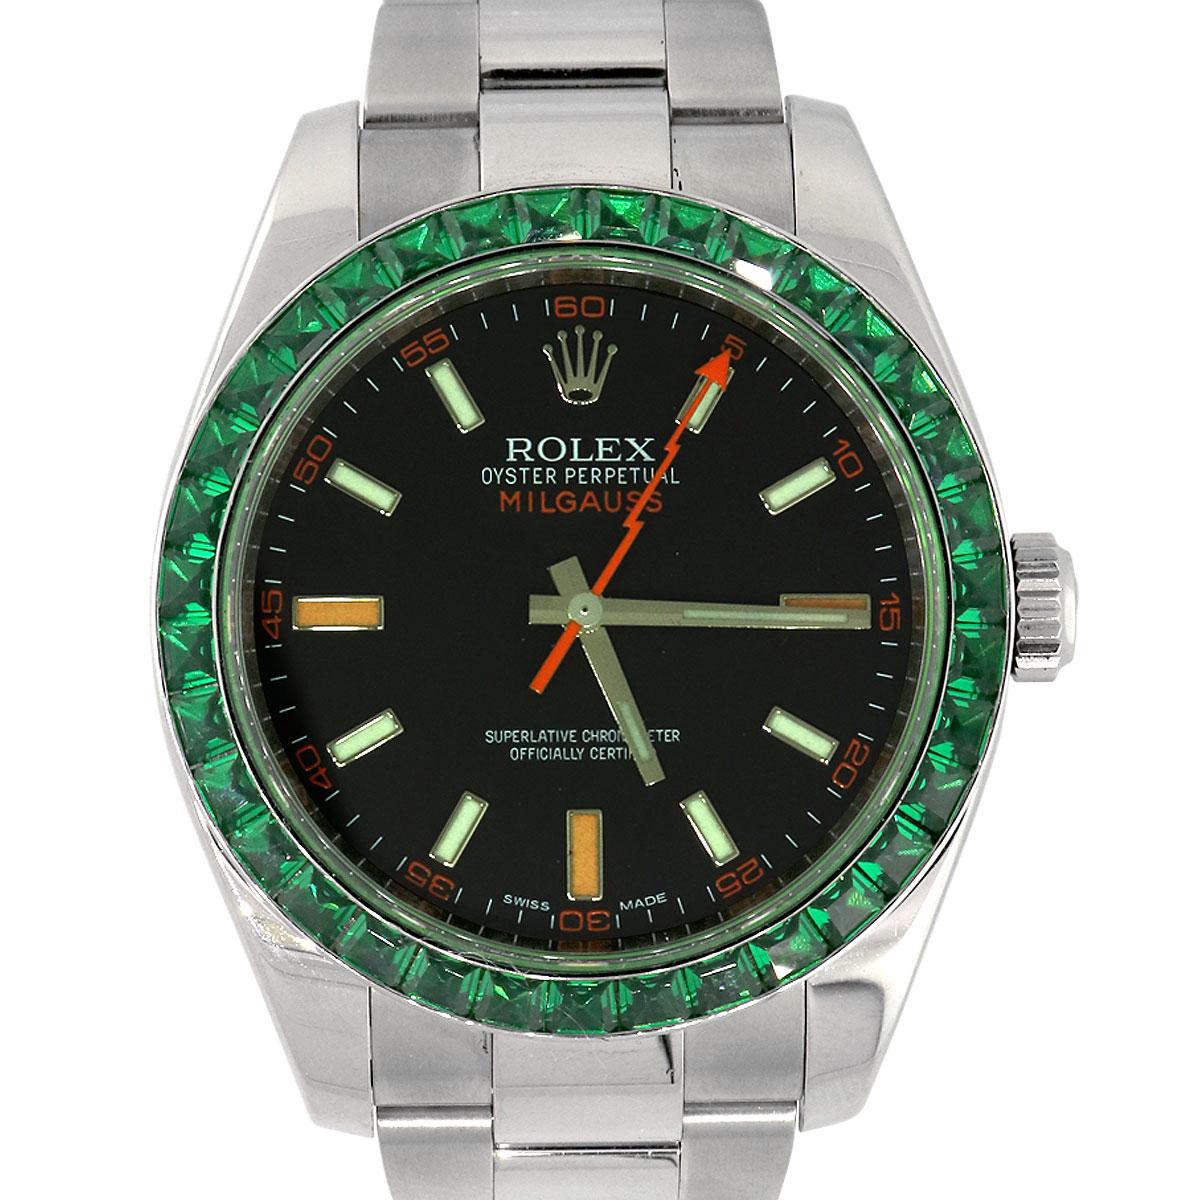 Brand: Rolex
MPN: 116400
Model: Milgauss
Case Material: Stainless Steel
Case Diameter: 40mm
Crystal: Scratch resistant green sapphire
Bezel: Stainless Steel Emerald Gemstone Bezel (Aftermarket)
Dial: Black Dial With silver Hour Markers and Luminous